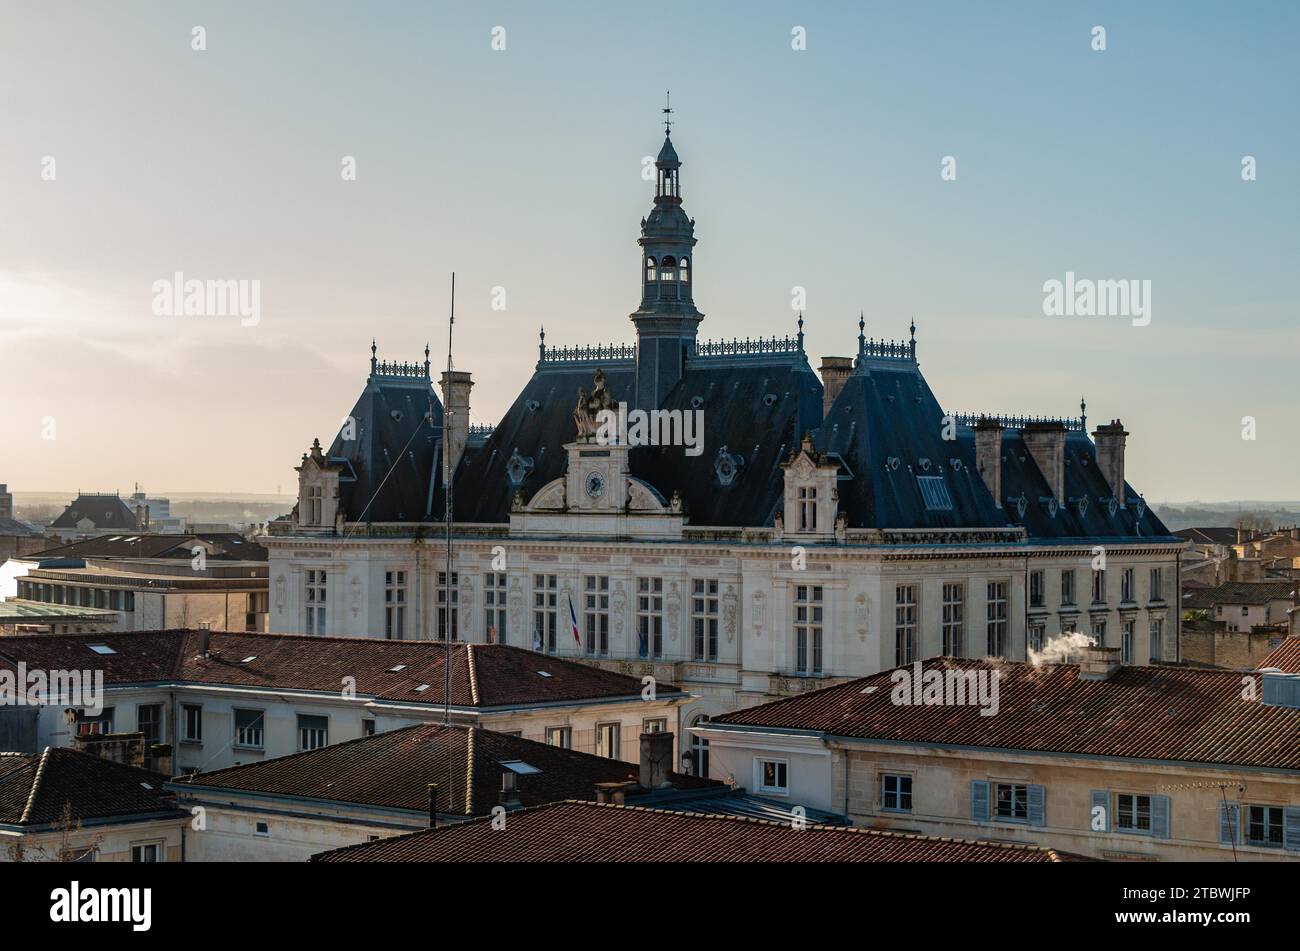 A picture of the Niort City Hall as seen from above the rooftops Stock Photo